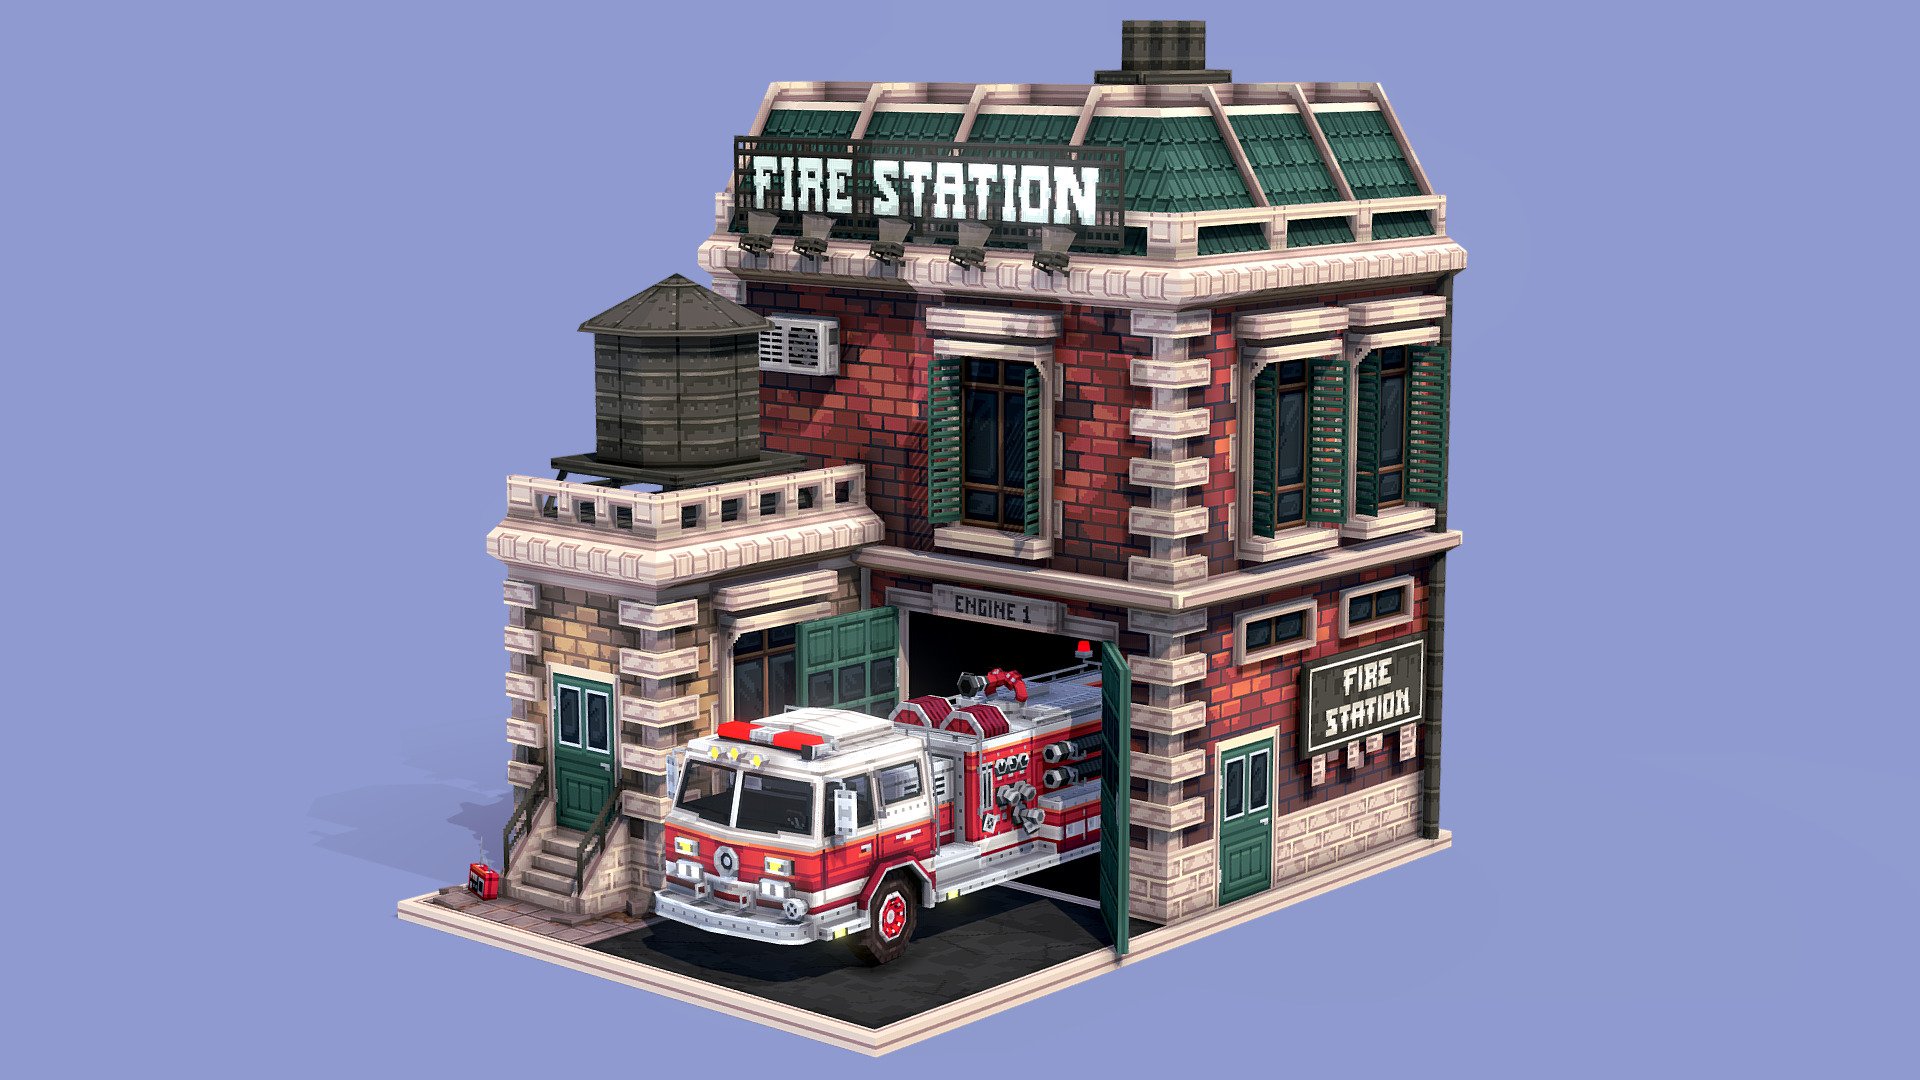 Fire station.
Made with Blockbench

More information about this model on:
https://grafisch.media/

 - Firestation - 3D model by Jelle (@Grafisch) 3d model